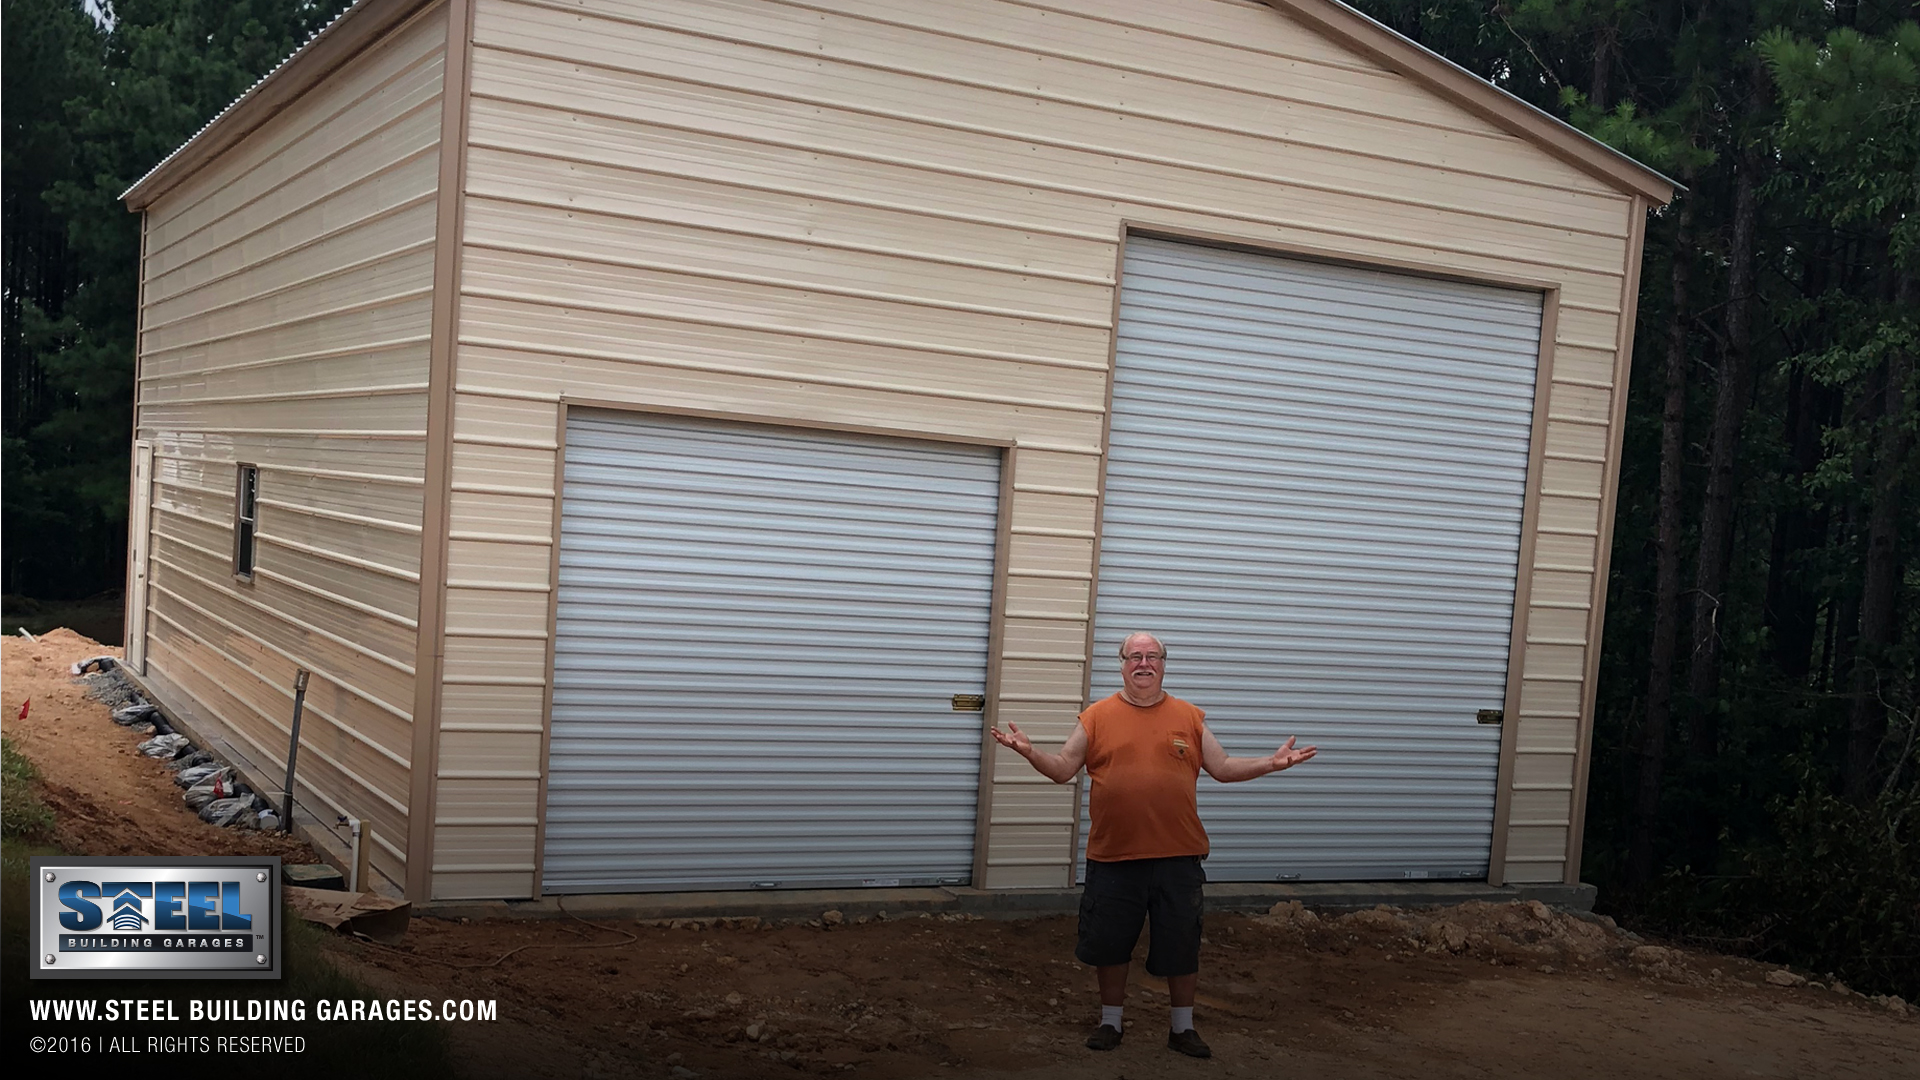 The finished garage with two different garage door sizes.